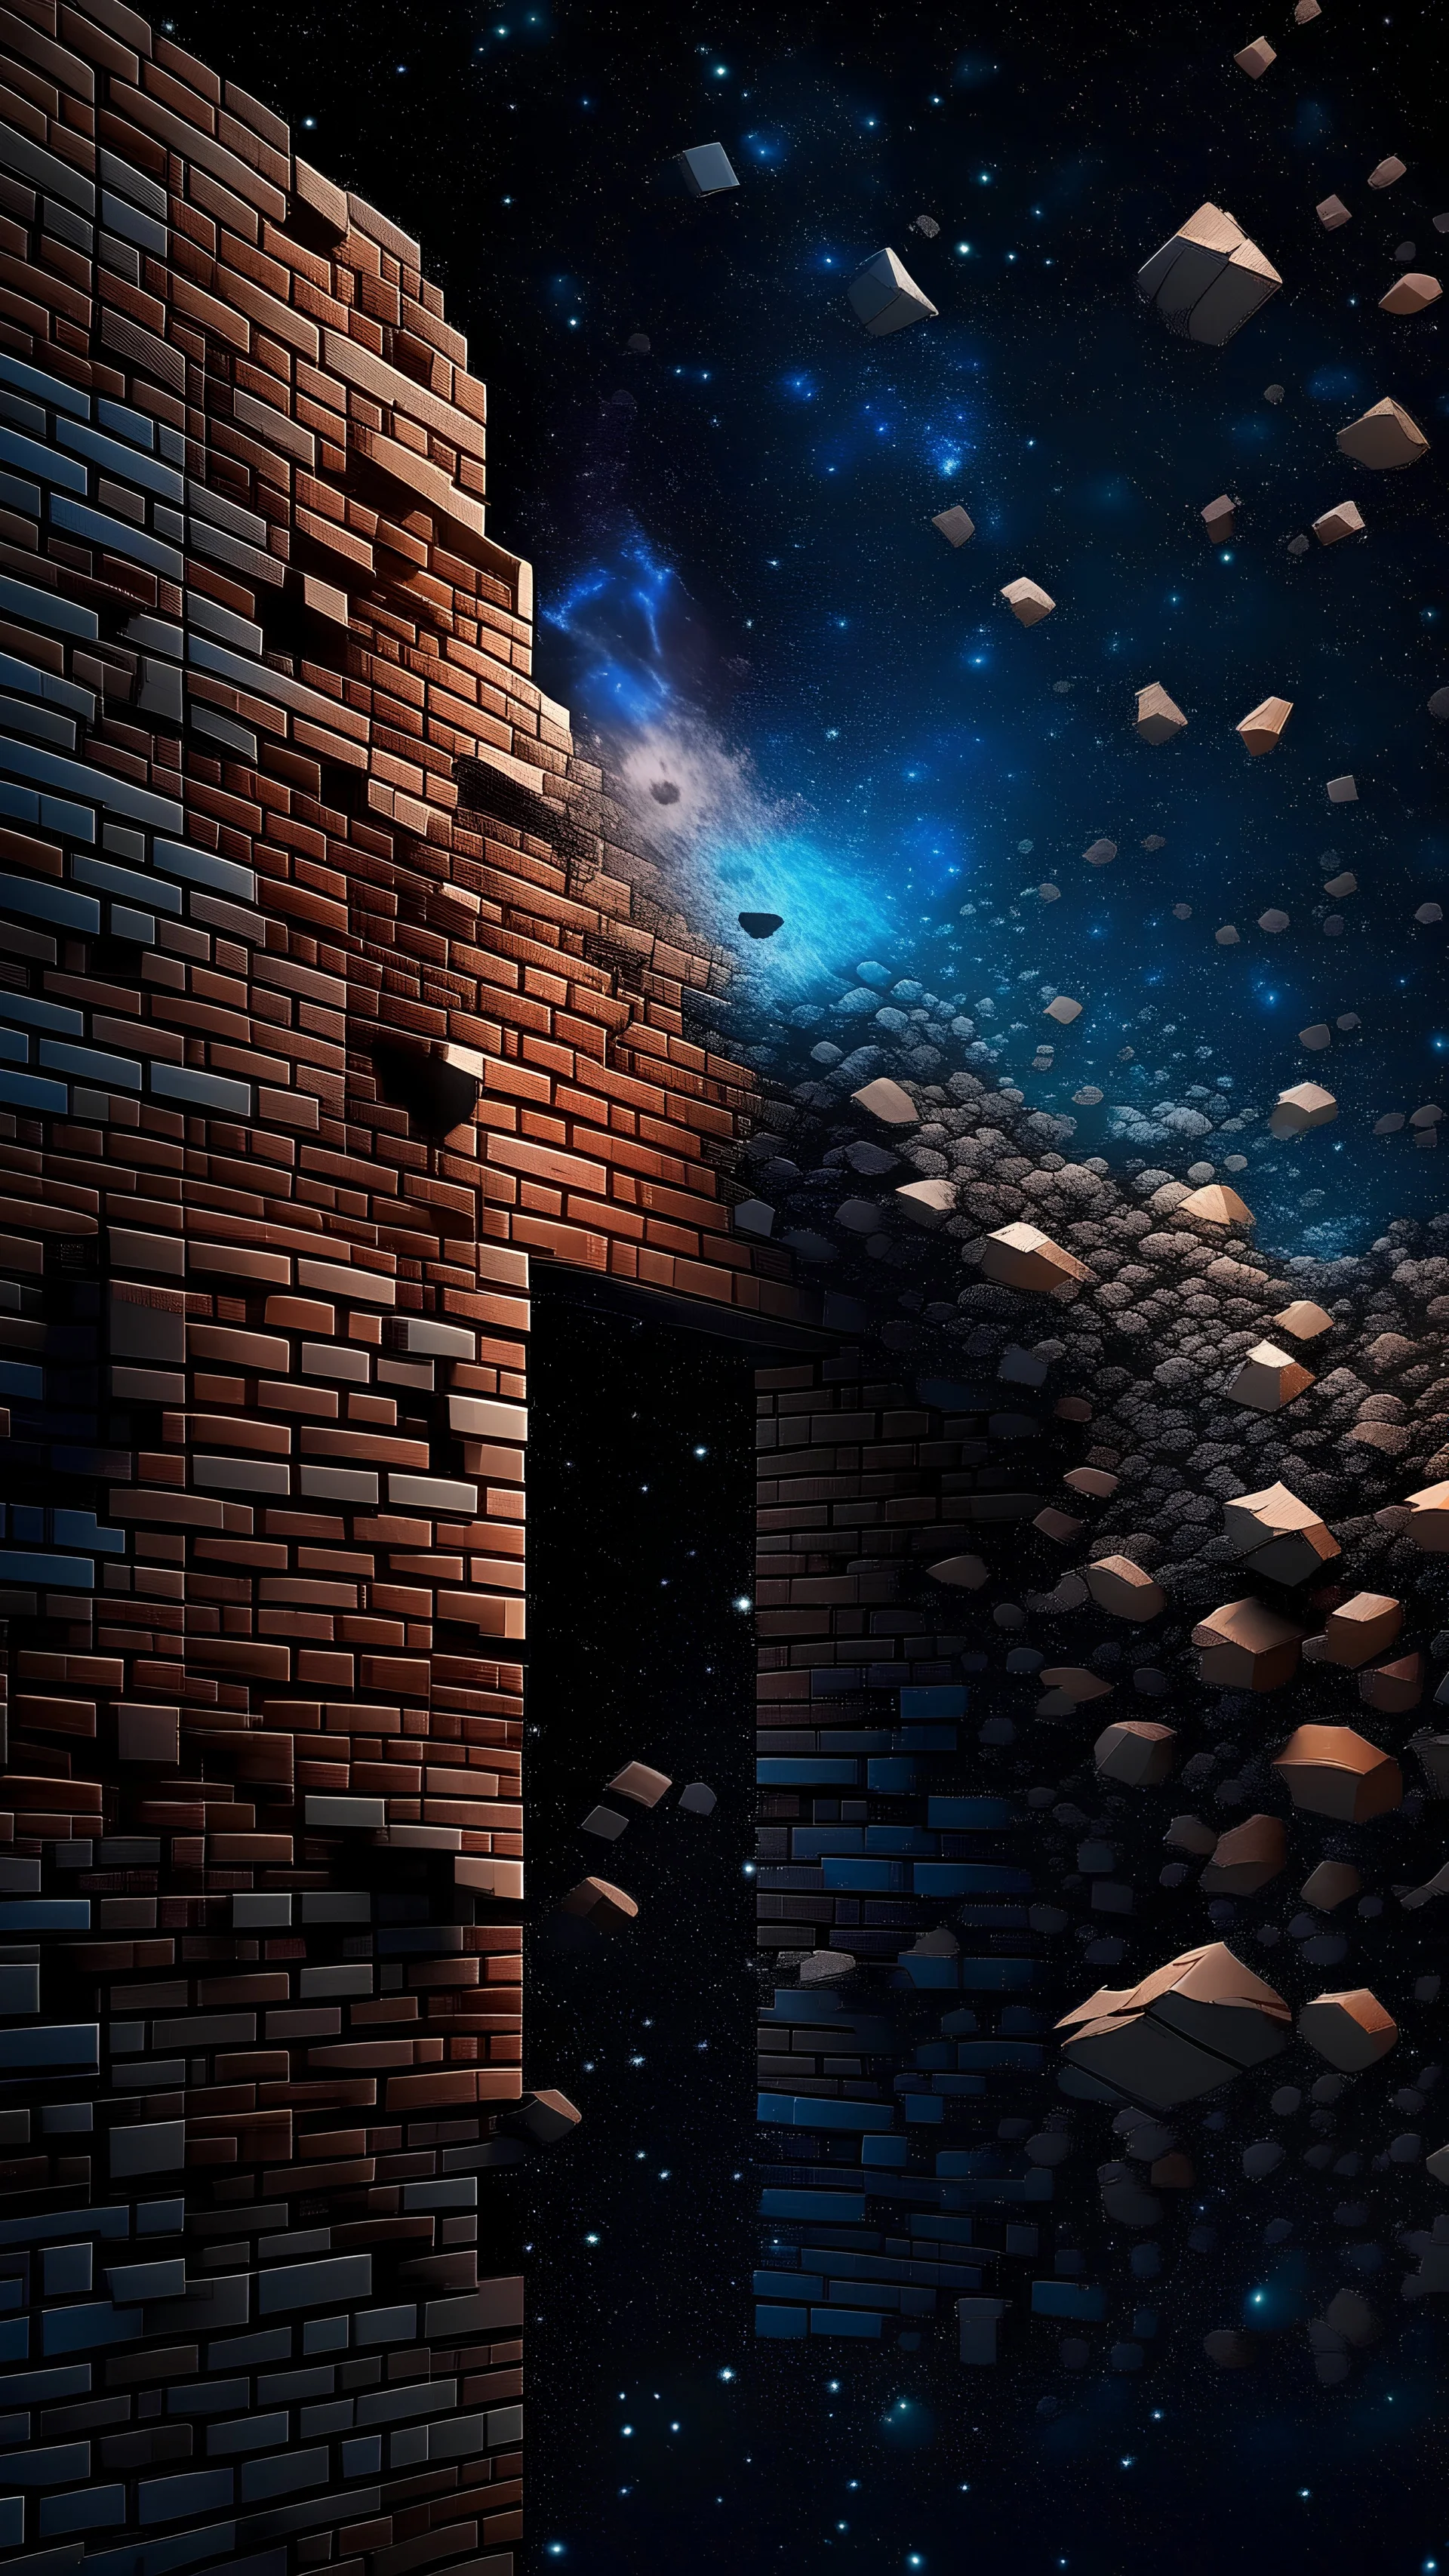 cosmic being shatters a brick wall